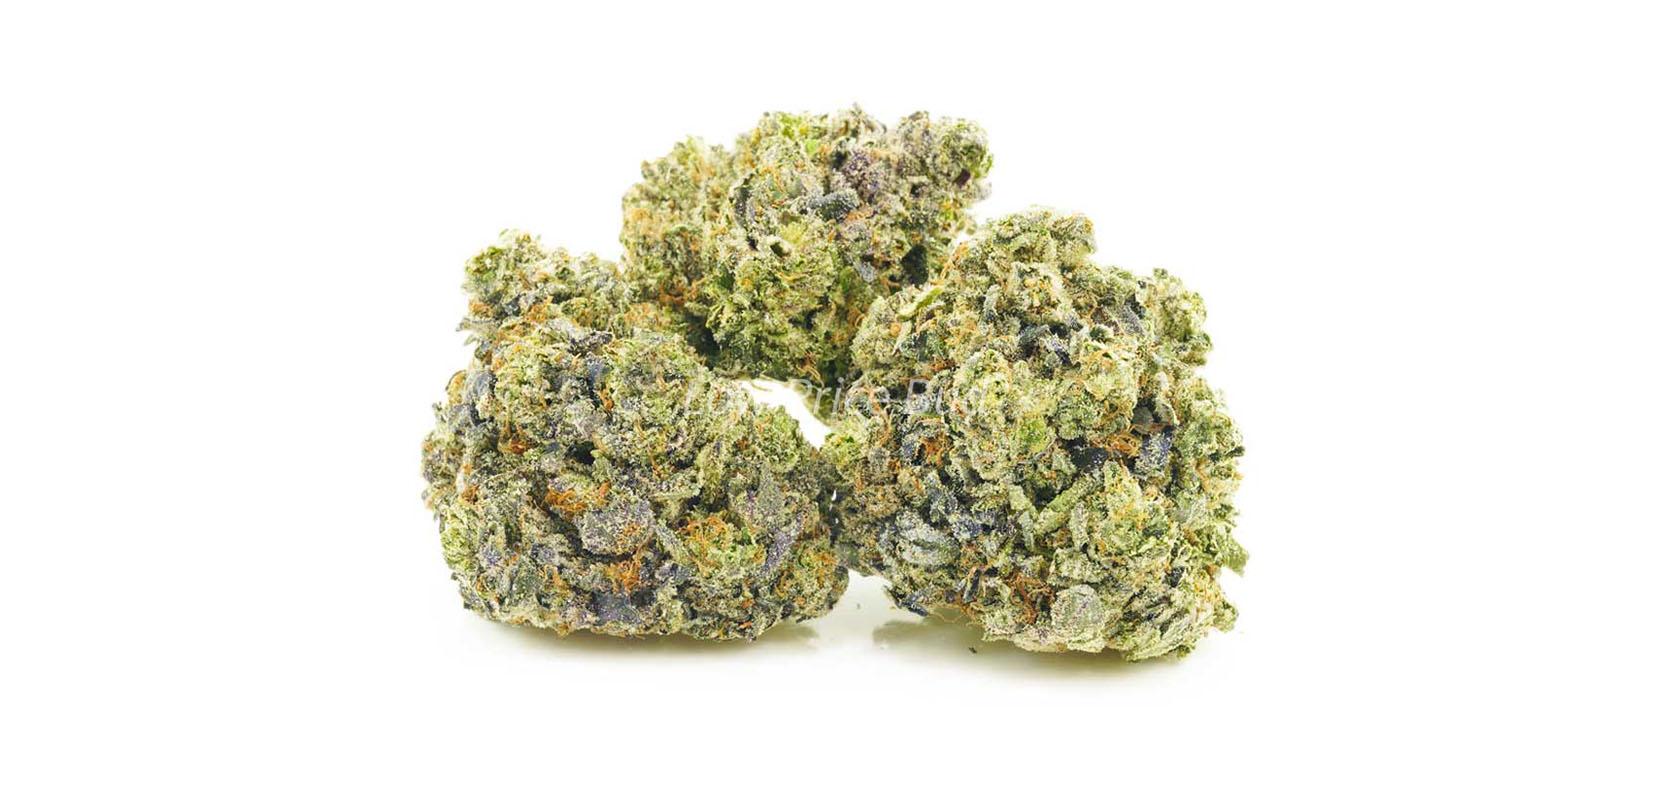 Super Bubba Kush weed online Canada from Low Price Bud online weed dispensary and mail order marijuana weed store for edibles, shatter, and weed online Canada.